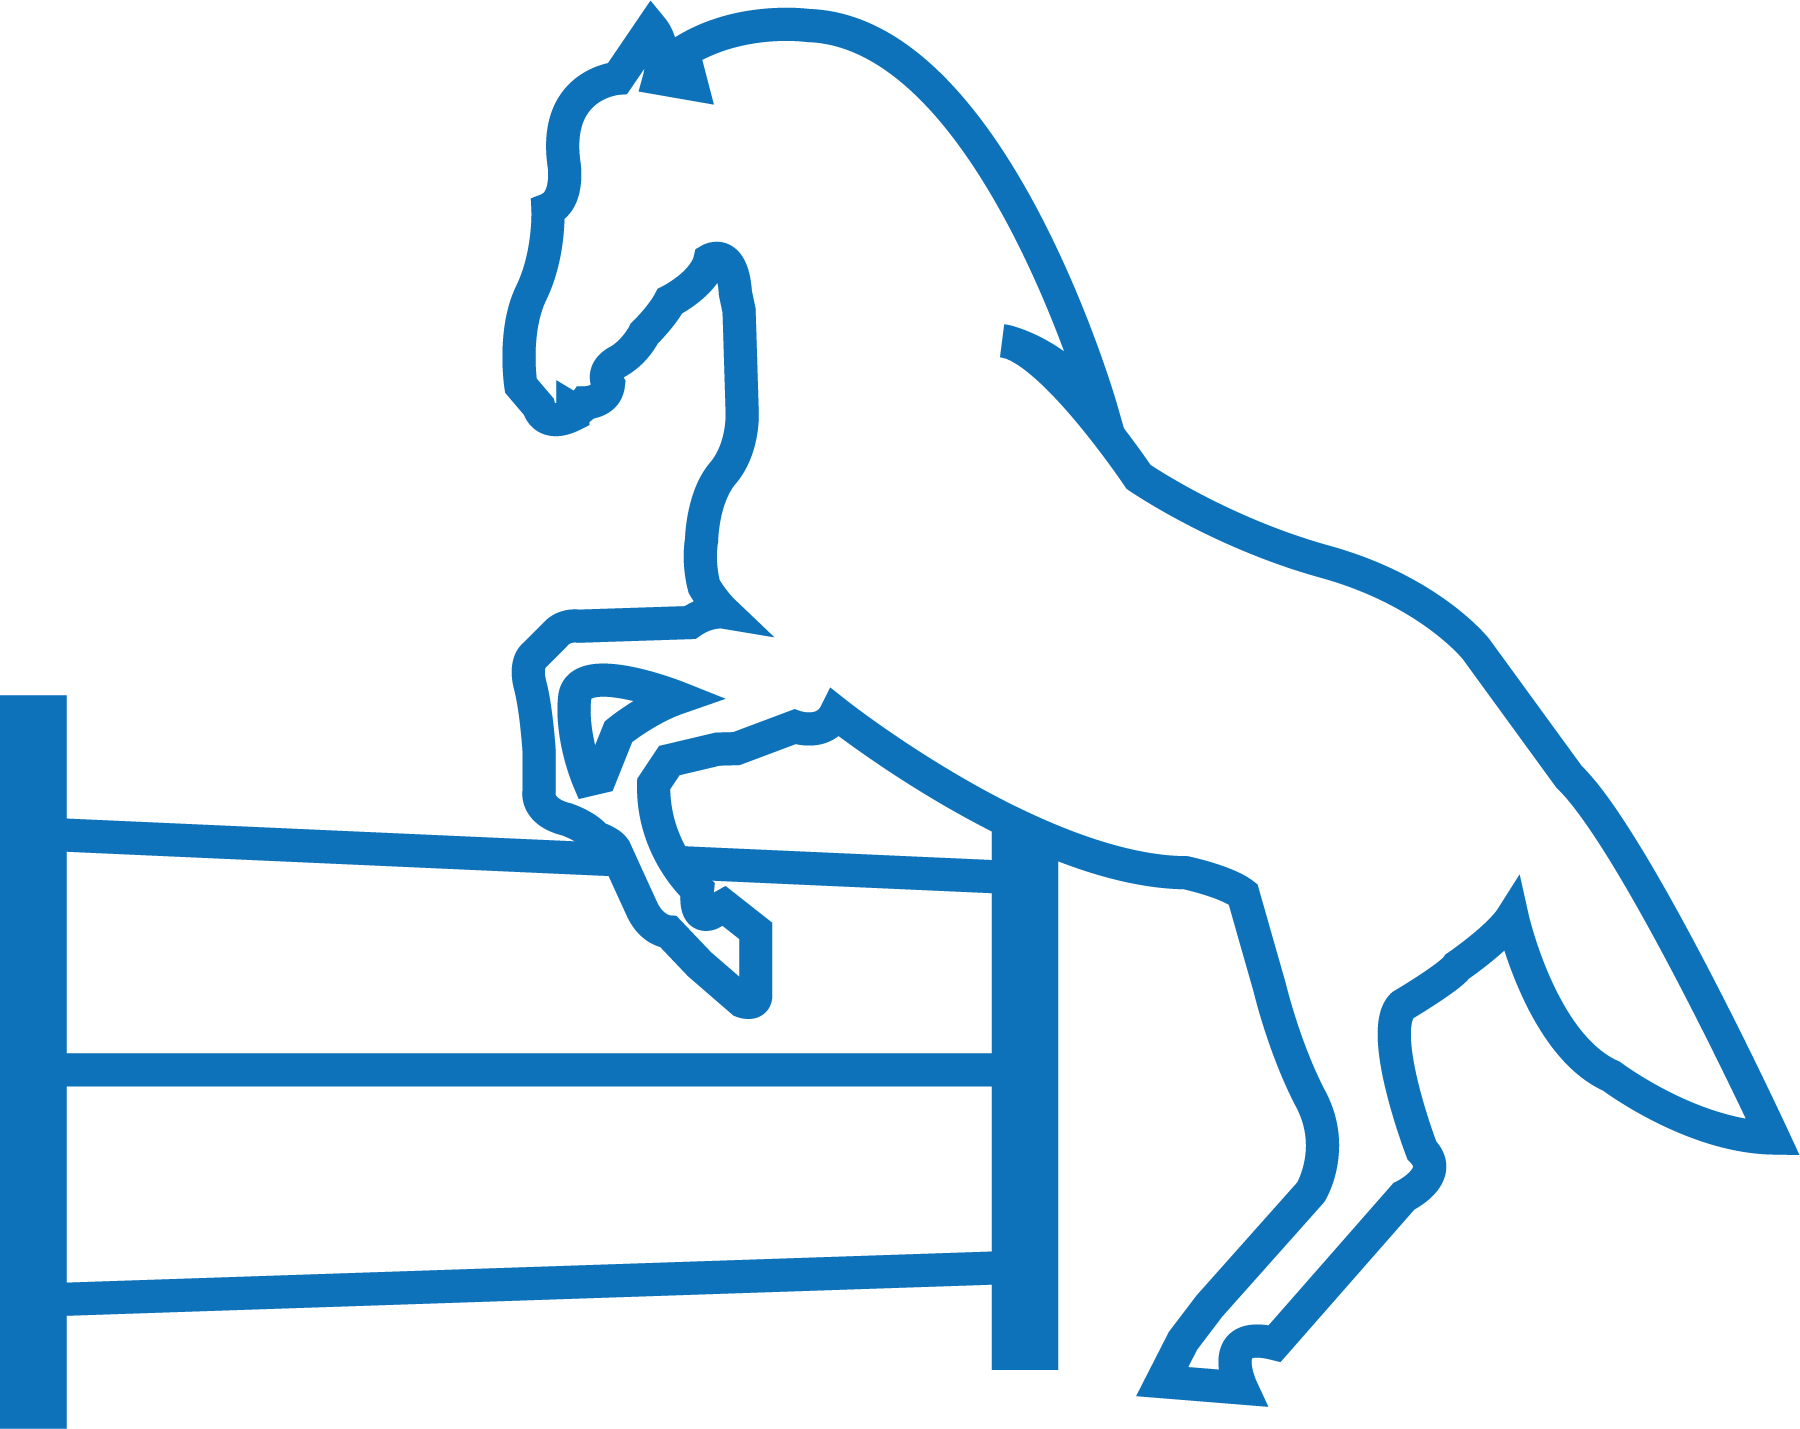 Graphic showing horse beginning to jump over a fence.